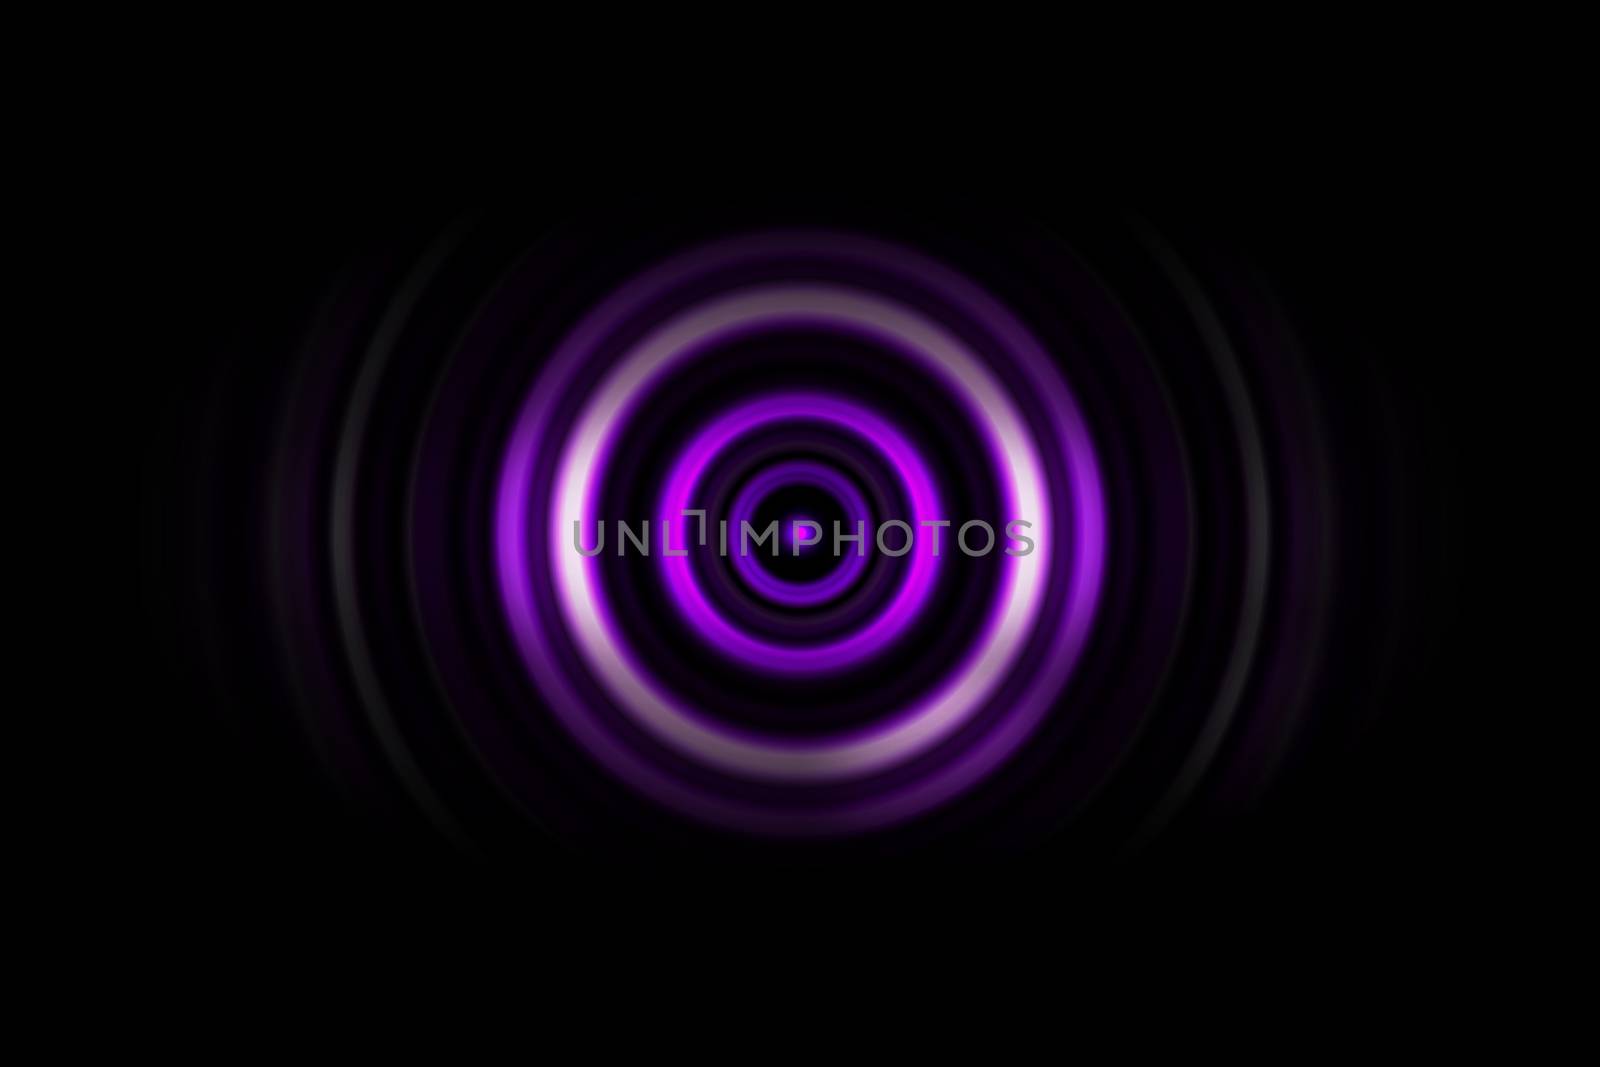 Abstract purple ring with sound waves oscillating background by mouu007